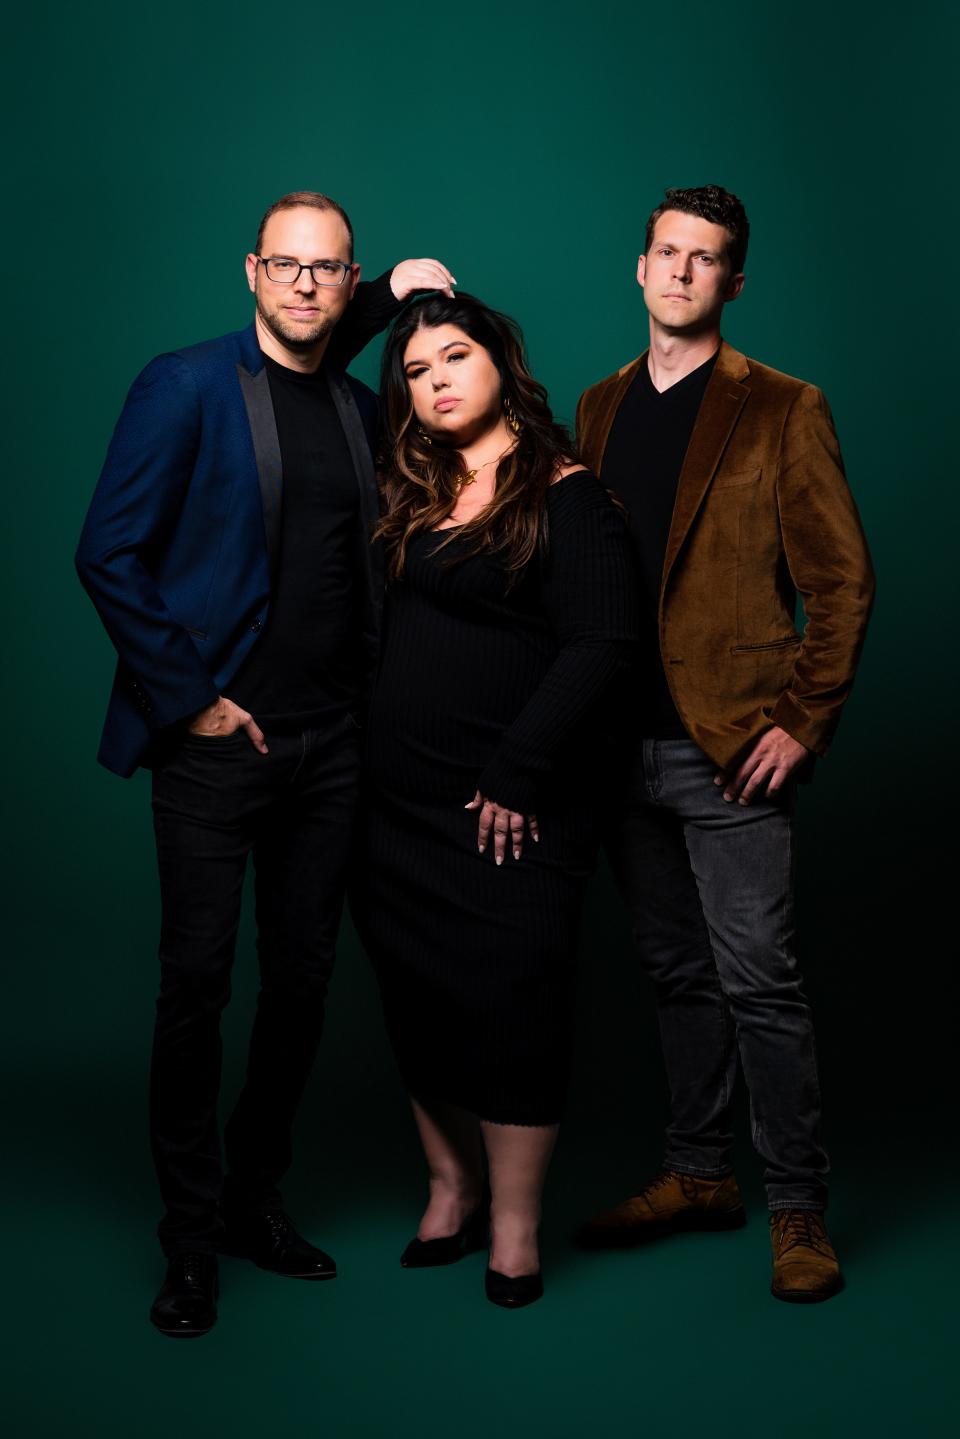 From left, pianist Ronny Michael Greenberg, Lenawee County-born opera singer Leah Crocetto and bass-baritone Christian Pursell are the trio Momenti. They are releasing their debut album Feb. 10.